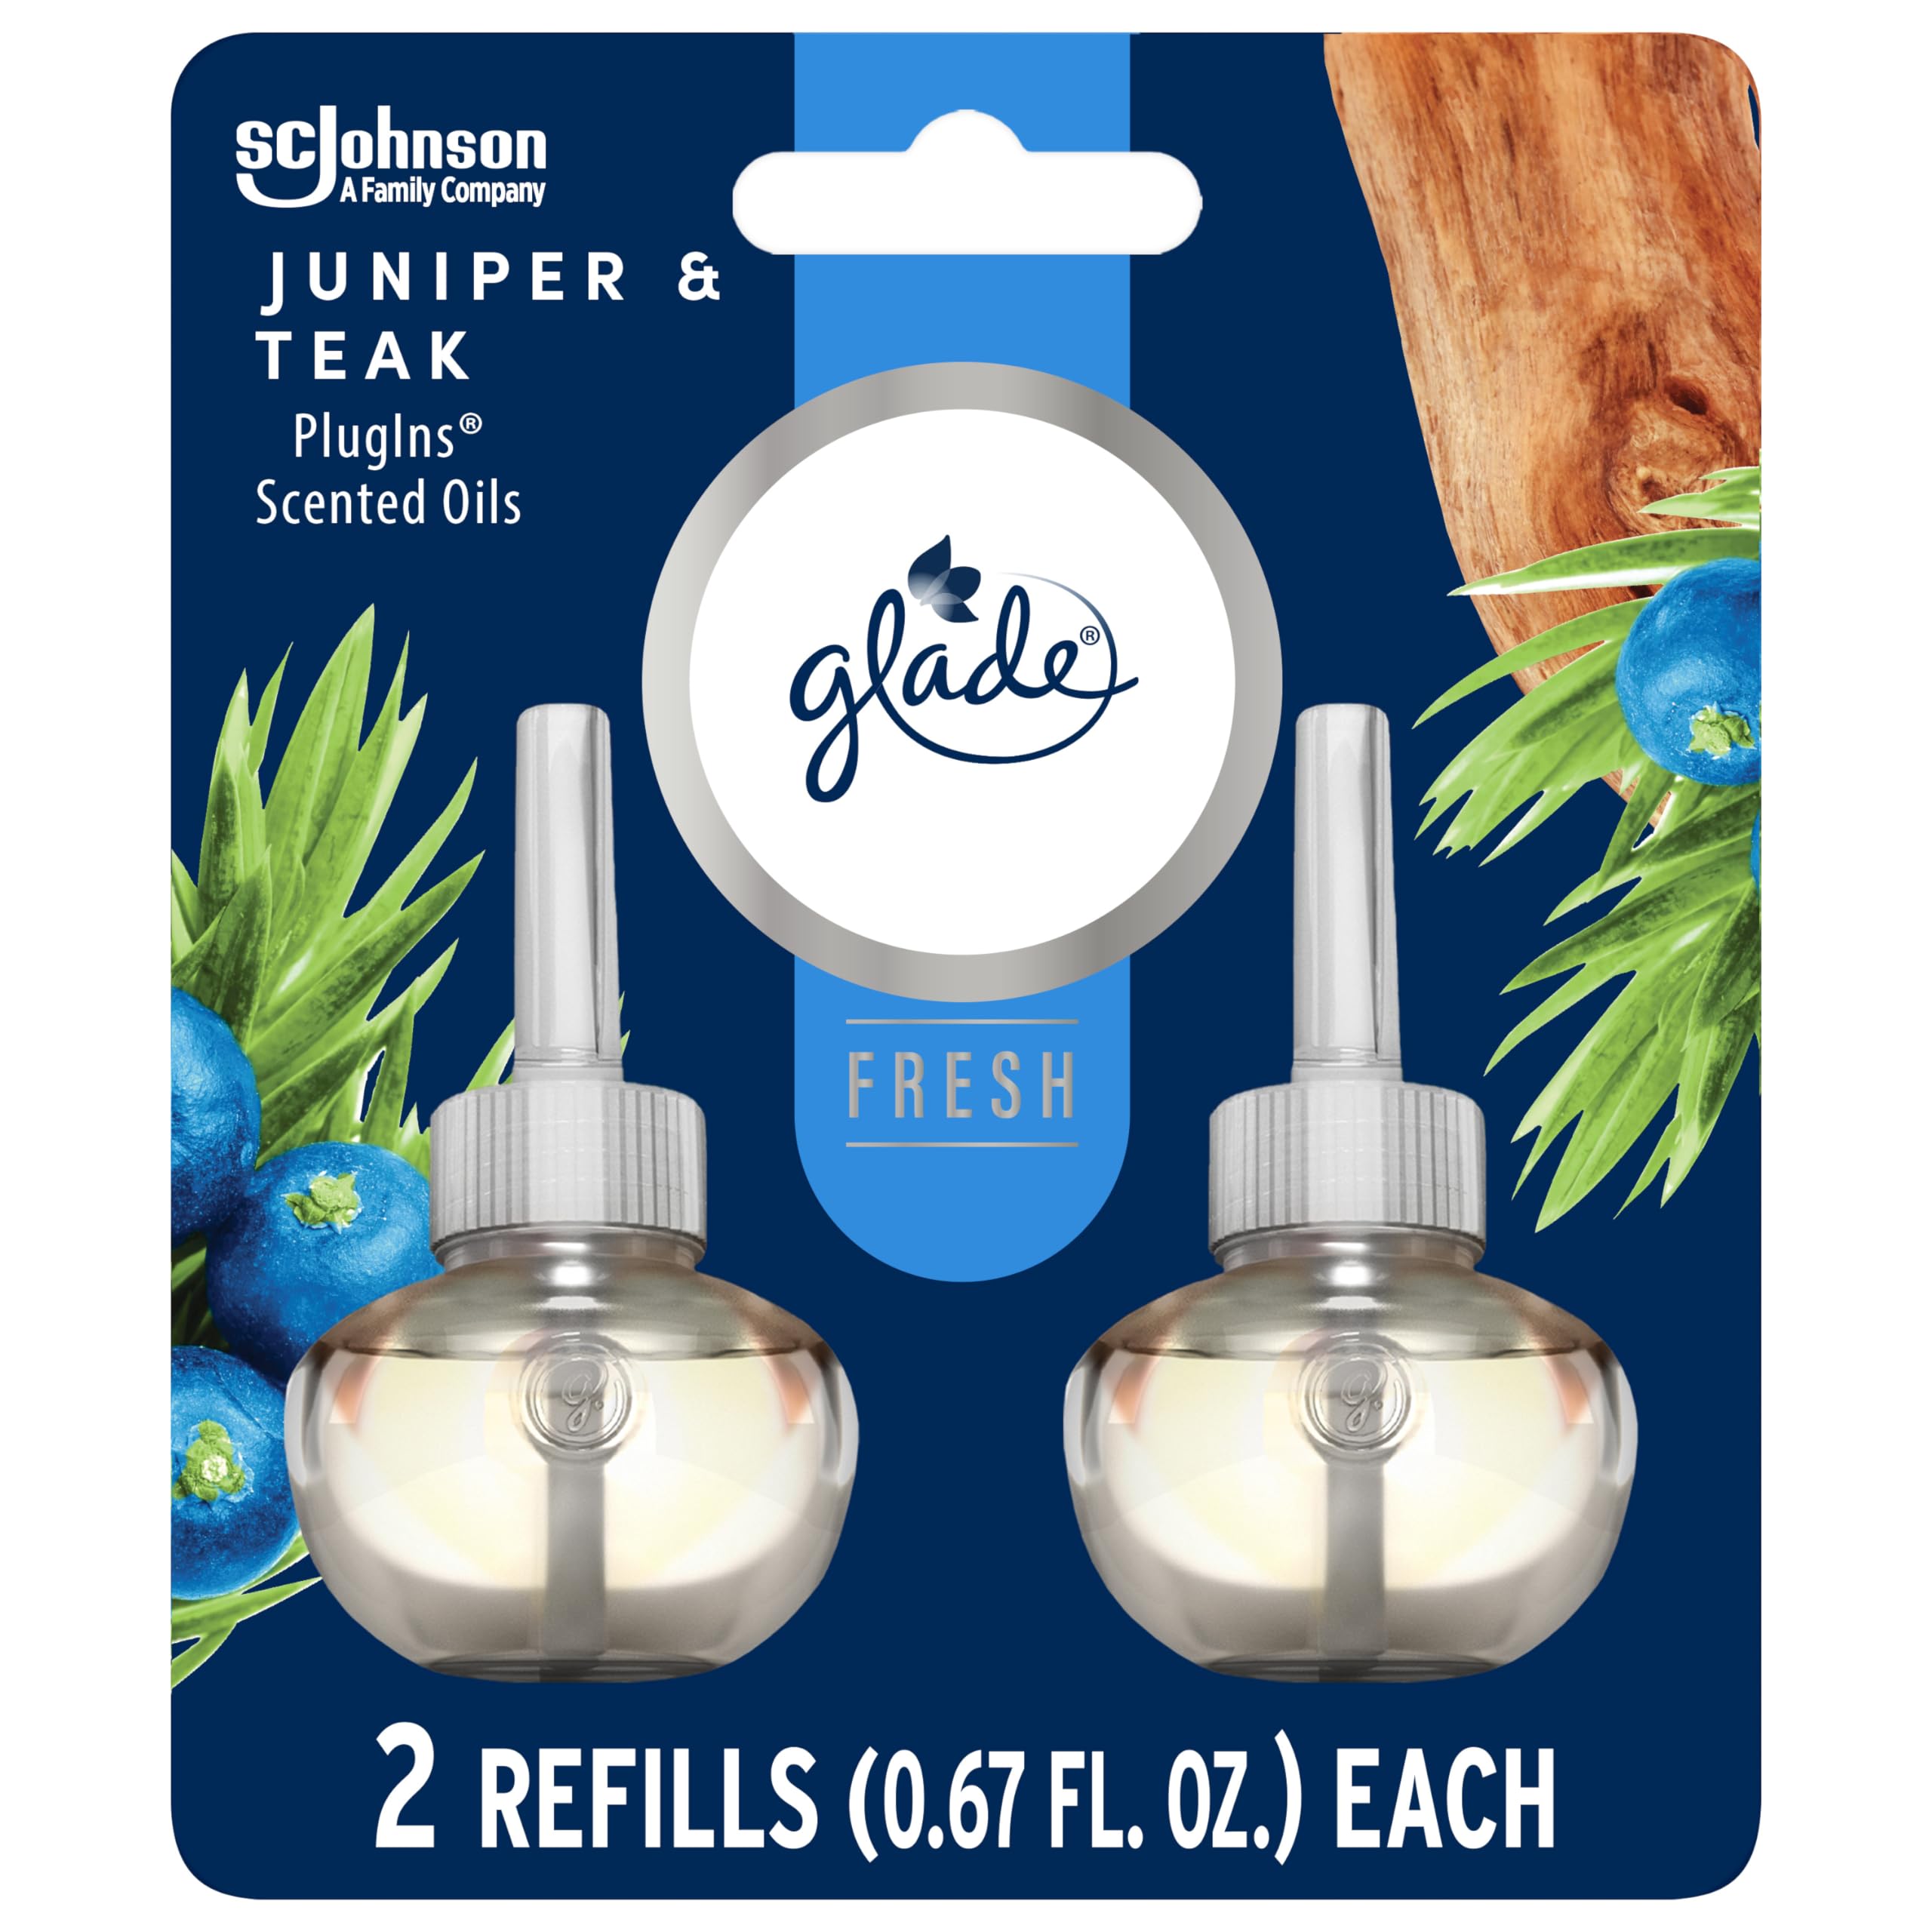 Glade PlugIns Refills Air Freshener, Scented and Essential Oils for Home and Bathroom, Juniper & Teak, Fresh Collection 1.34 Fl Oz, 2 Count